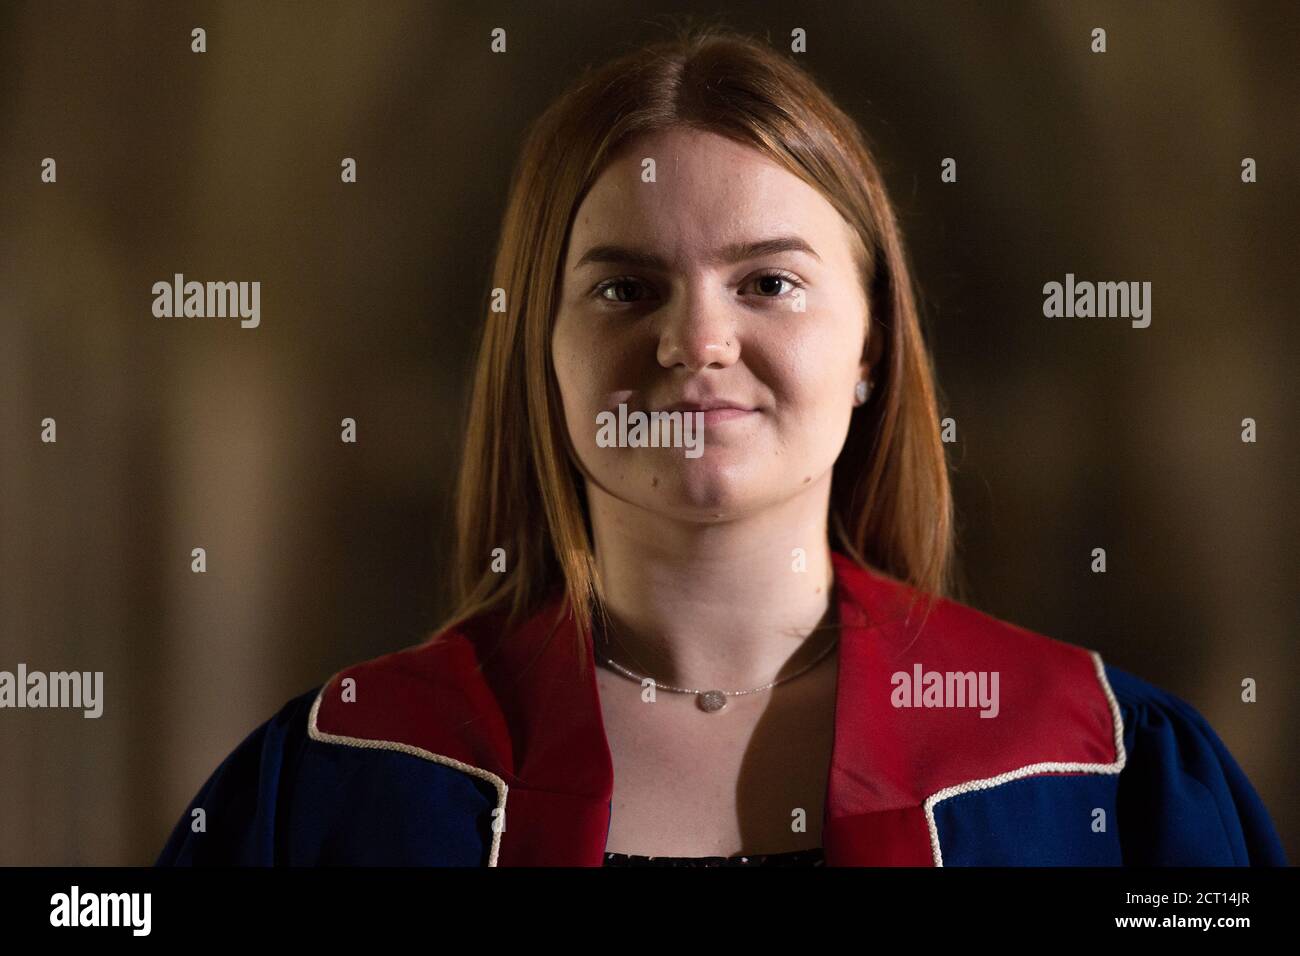 Glasgow, Scotland, UK. 20 September 2020. Pictured: Emma Margaret Currie, 2020/21 President of University of Glasgow Conservative and Unionist Association, originally formed in 1836 as the Robert Peel Club, which today is the oldest Conservative and Unionist Association in the United Kingdom. Credit: Colin Fisher/Alamy Live News. Stock Photo